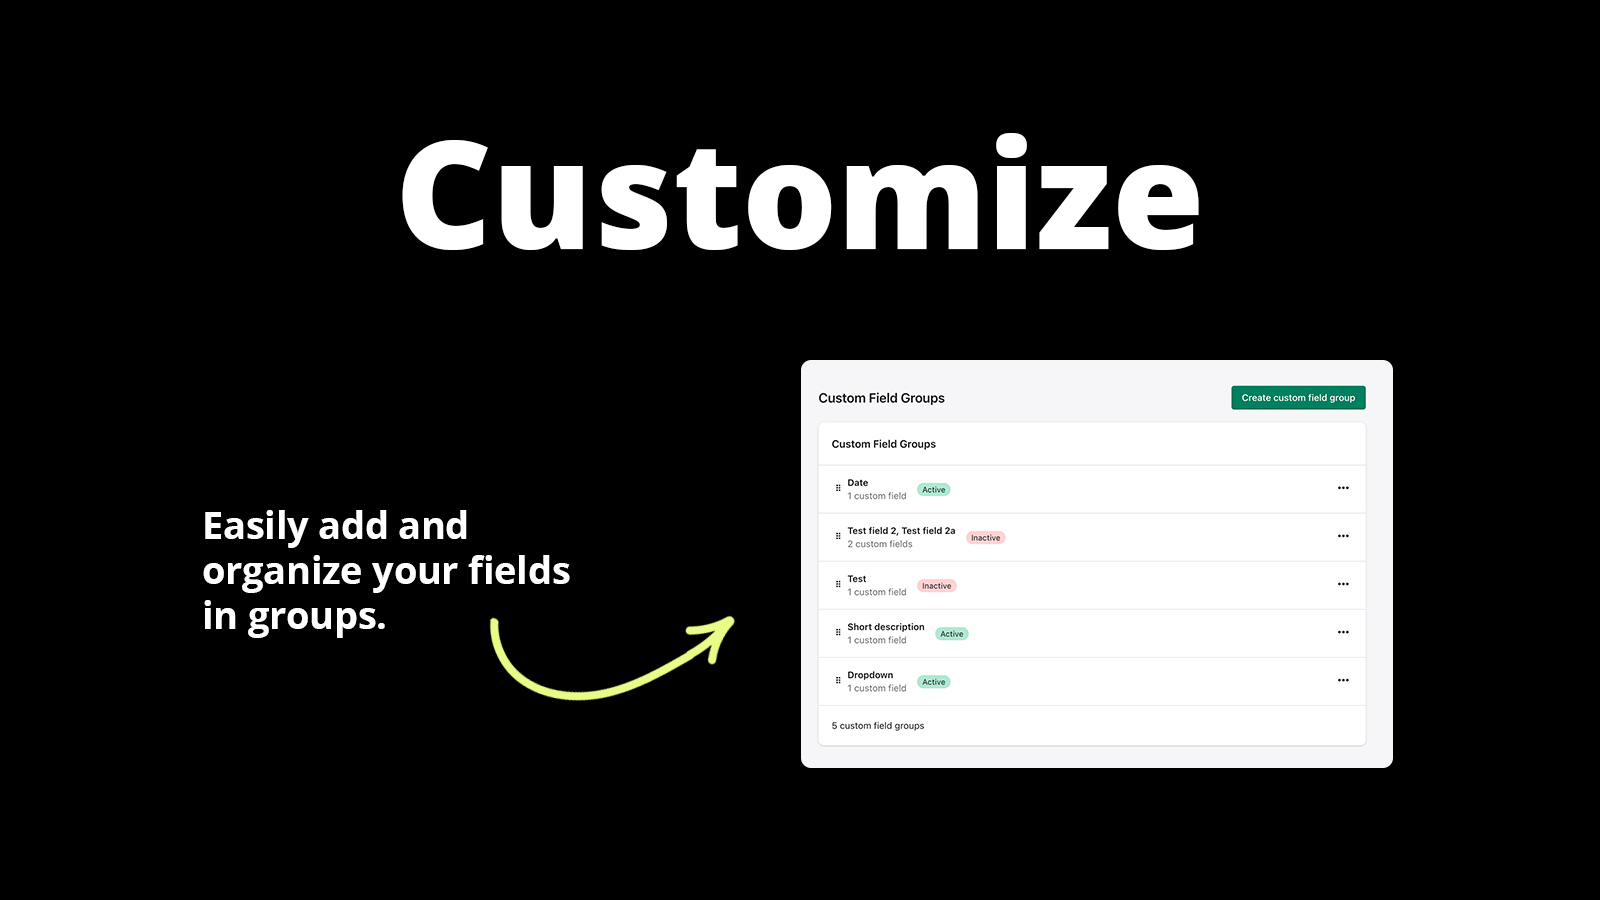 Customize. Easily add and organize your fields in groups.